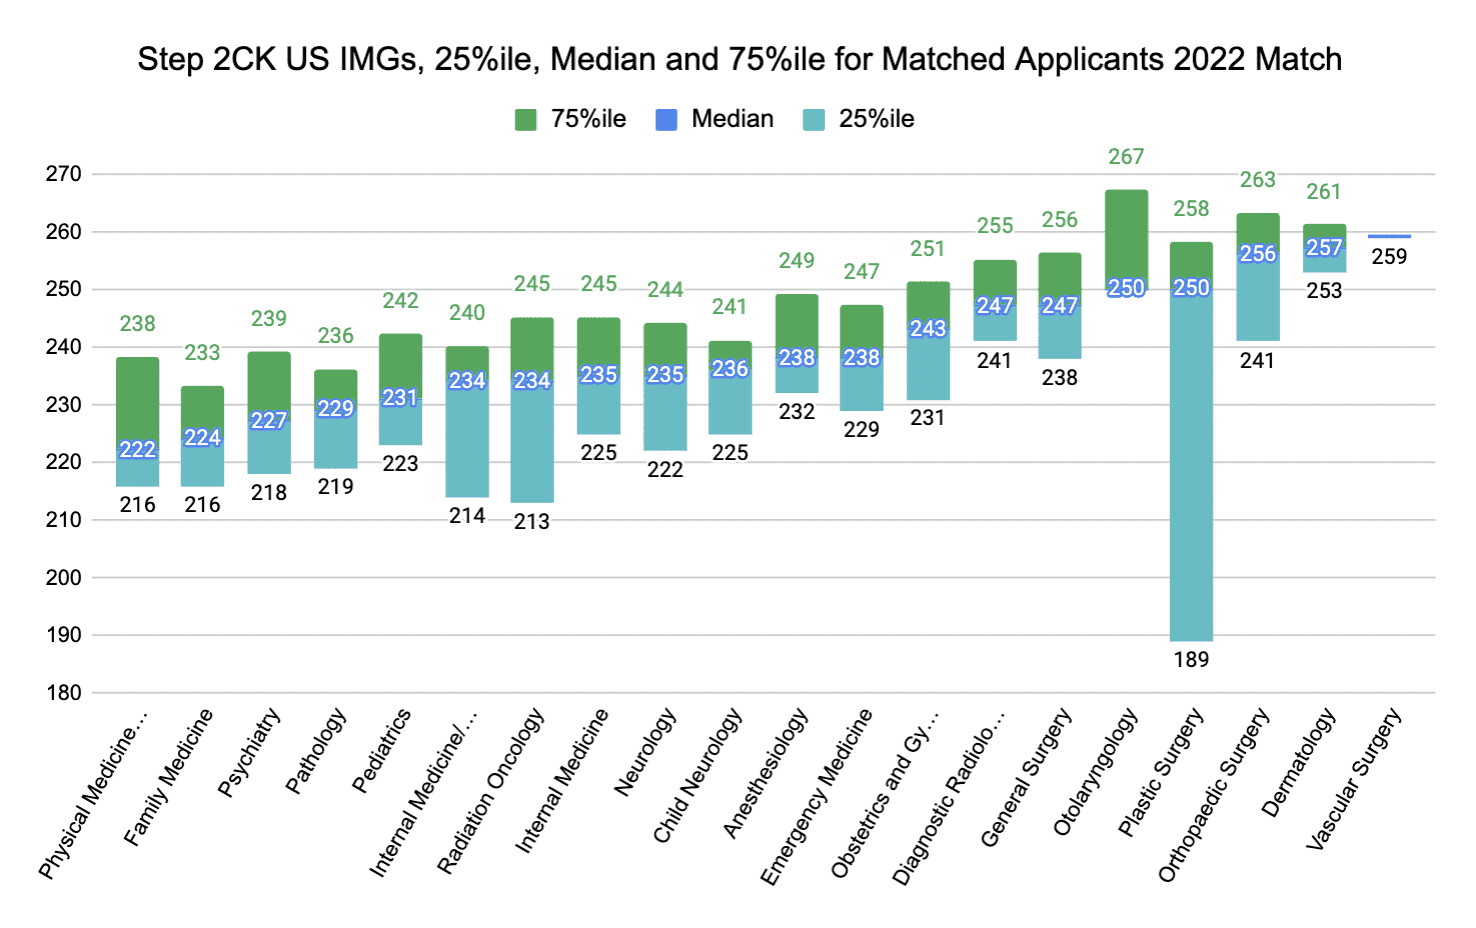 Step 2 CK US IMGs, 25%ile, Median and 75%ile for Matched Applicants 2022 Match